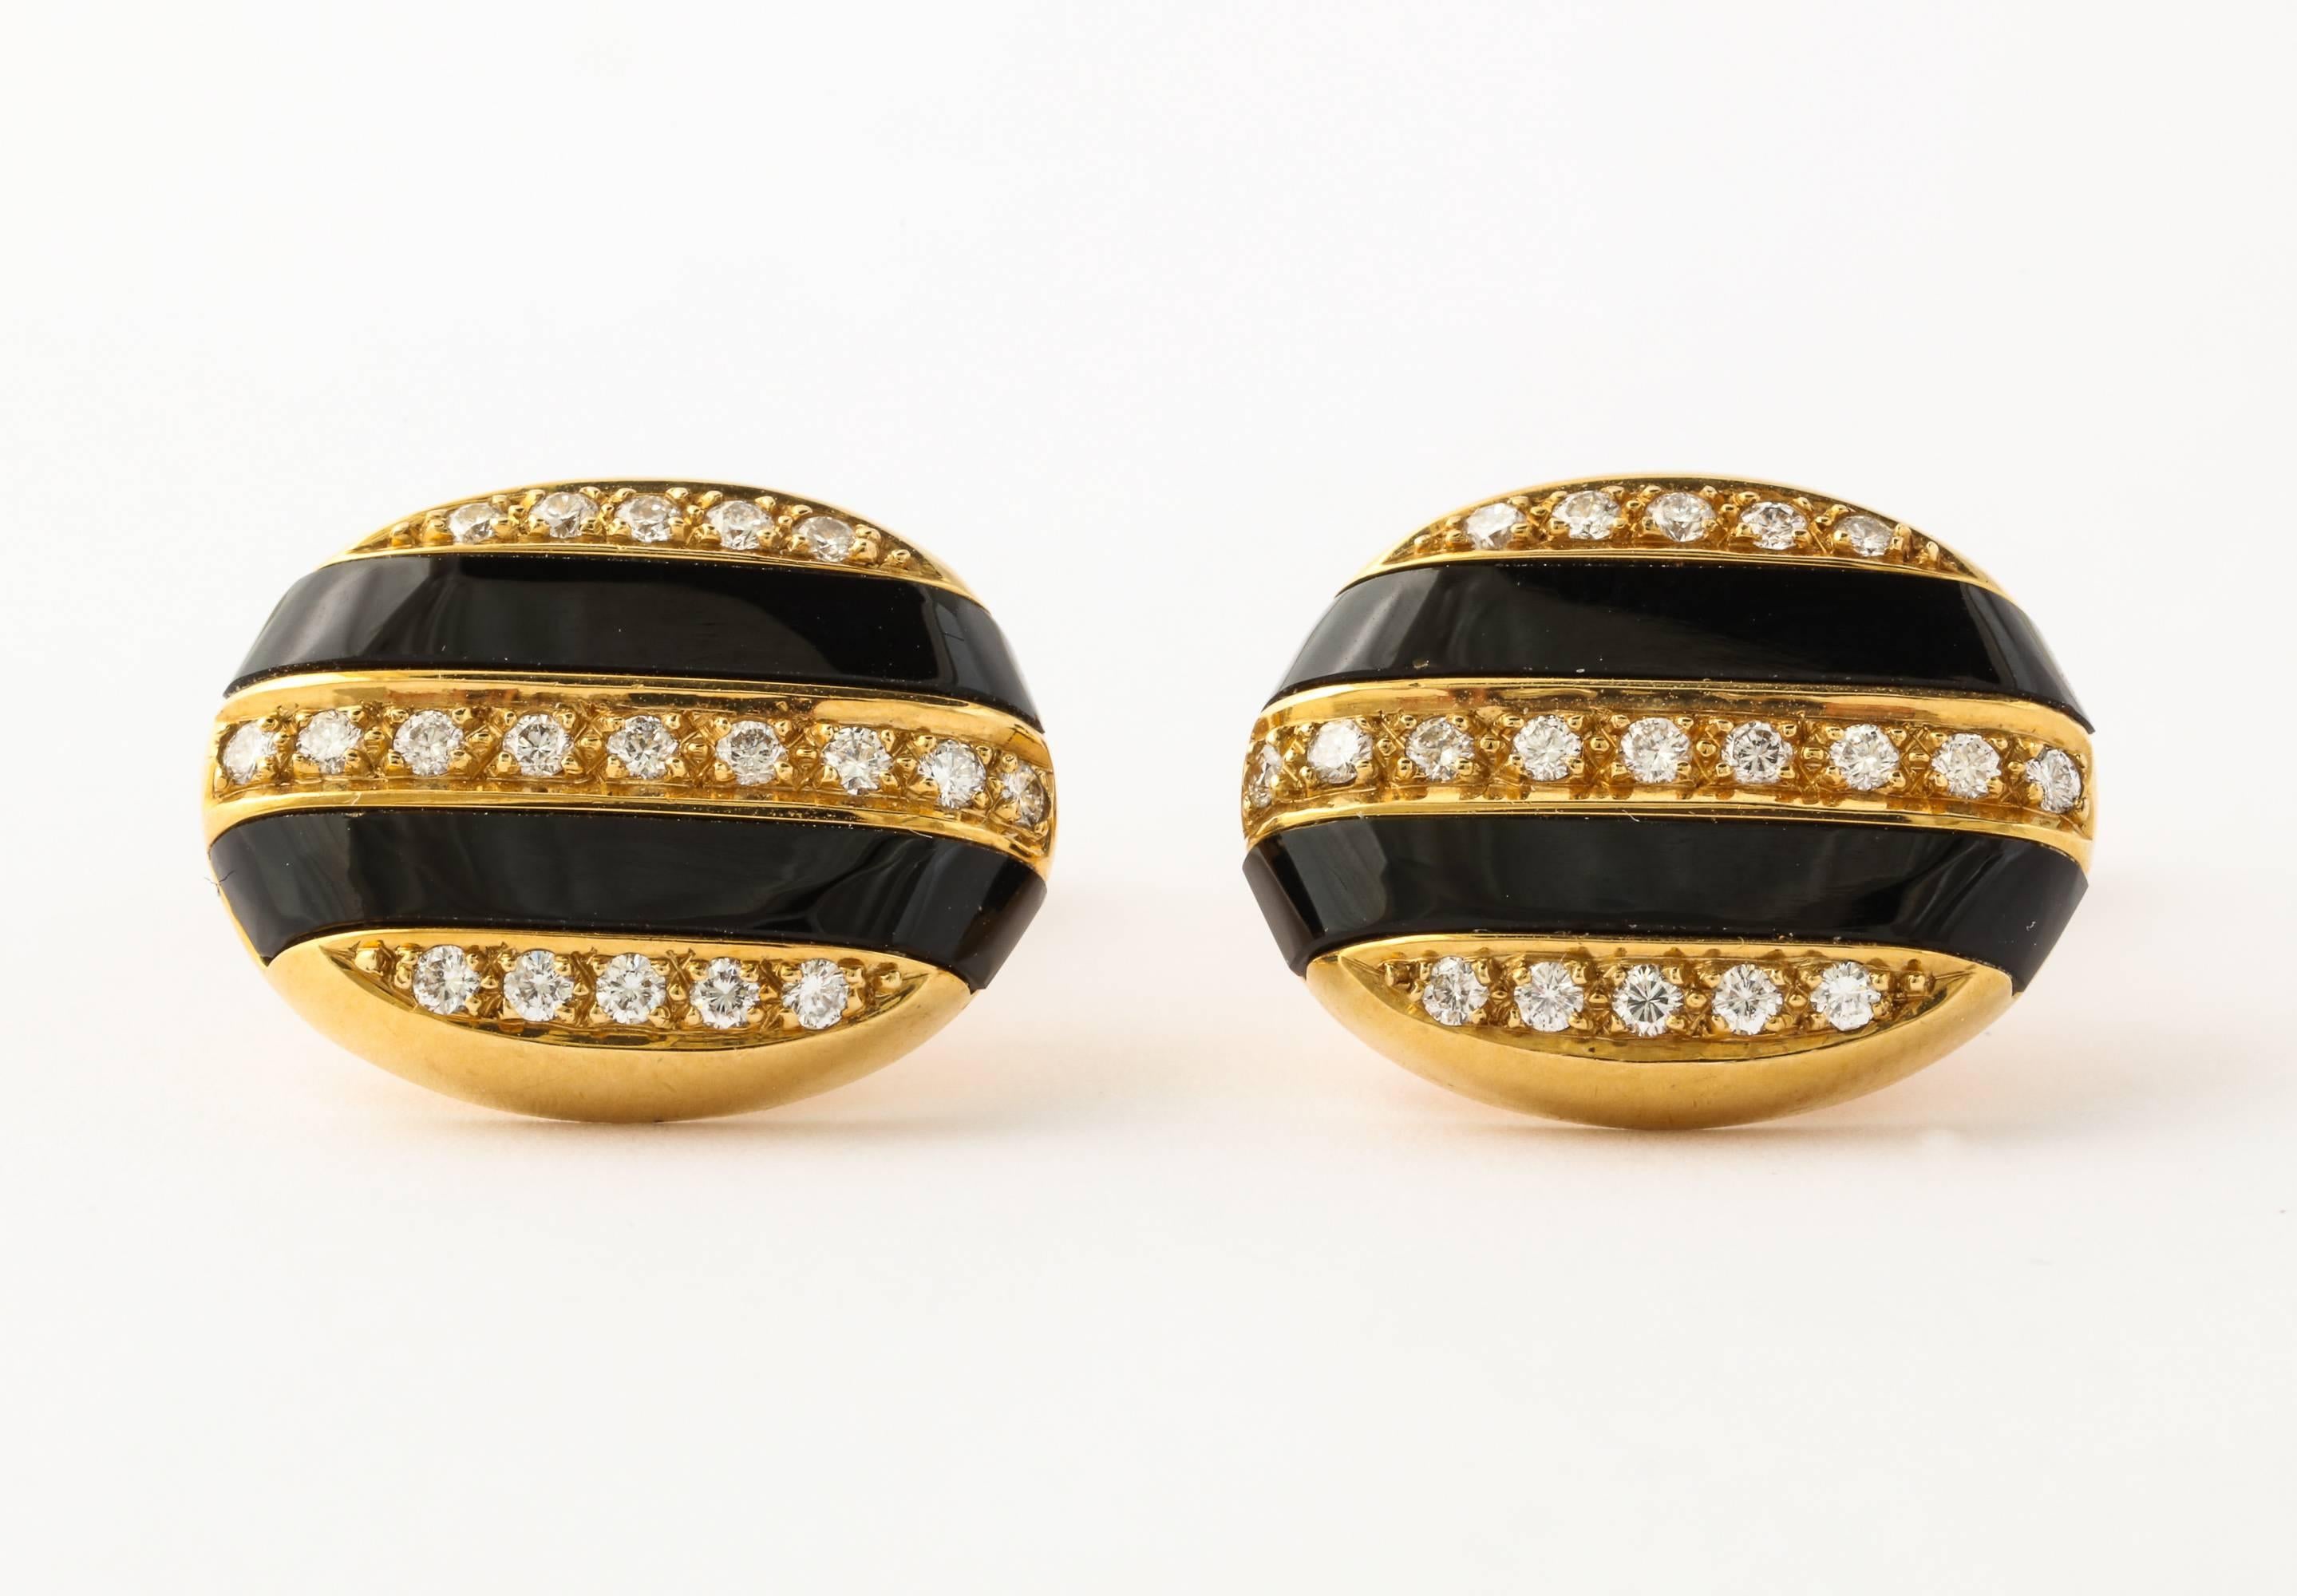 A handsome and elegant Tiffany & Co. man's dress set of cuff links and three shirt studs of 18K gold, set with diamonds and sections of carved black jade.
3/4 inch at widest. 1.10 grams. Tiffany and gold marks. 